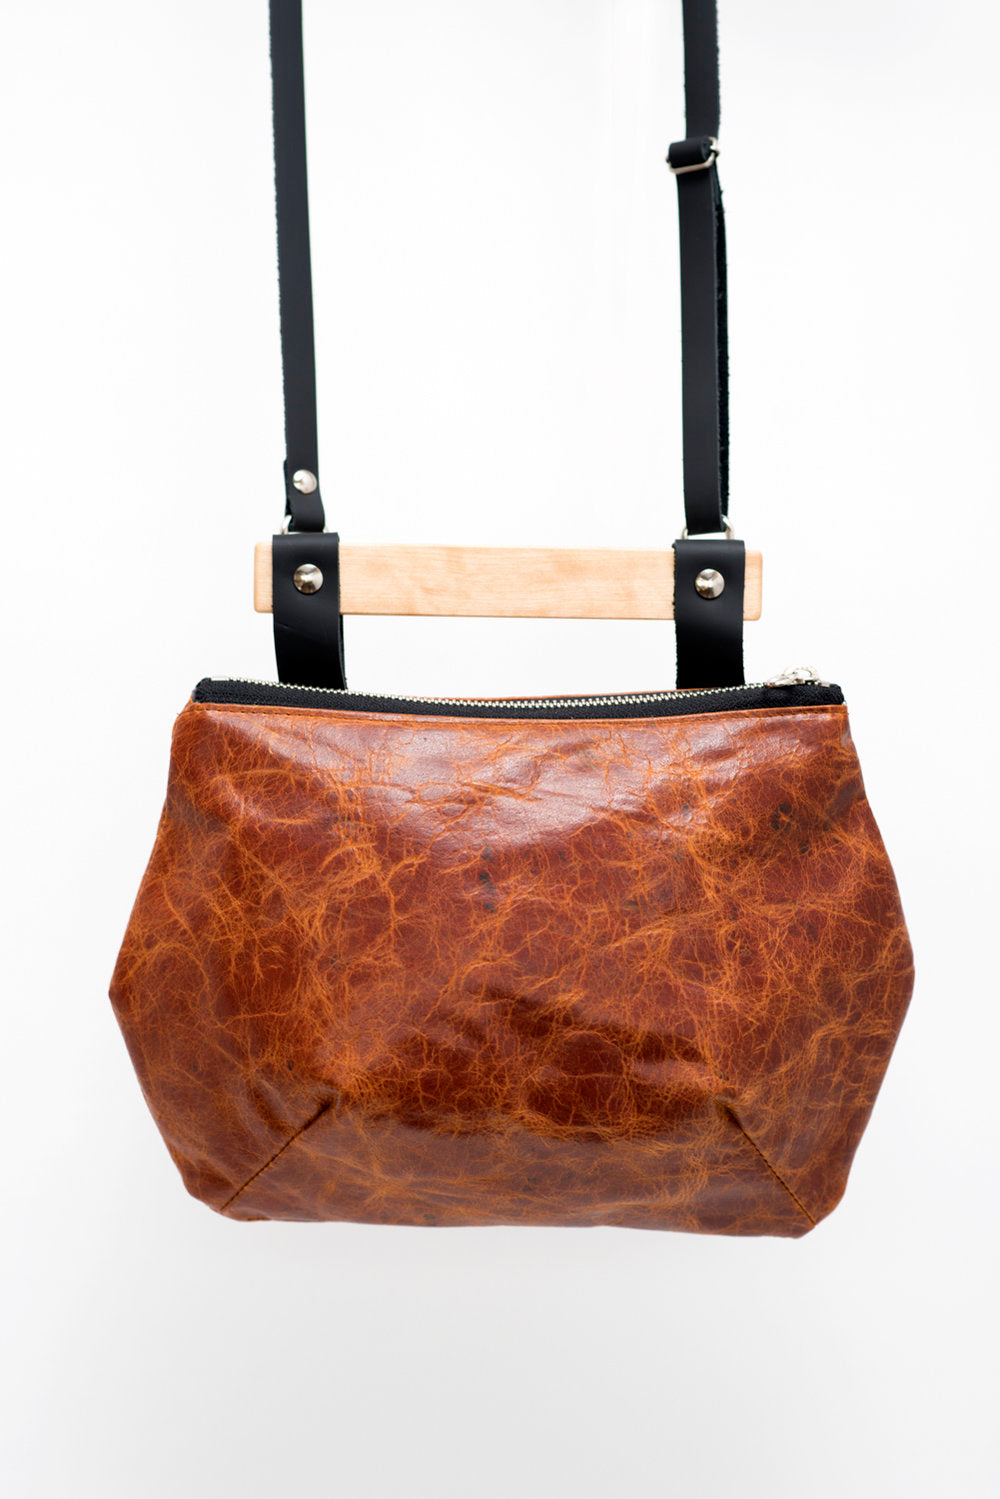 Leather crossbody bag with wood handle 20:25 made to order